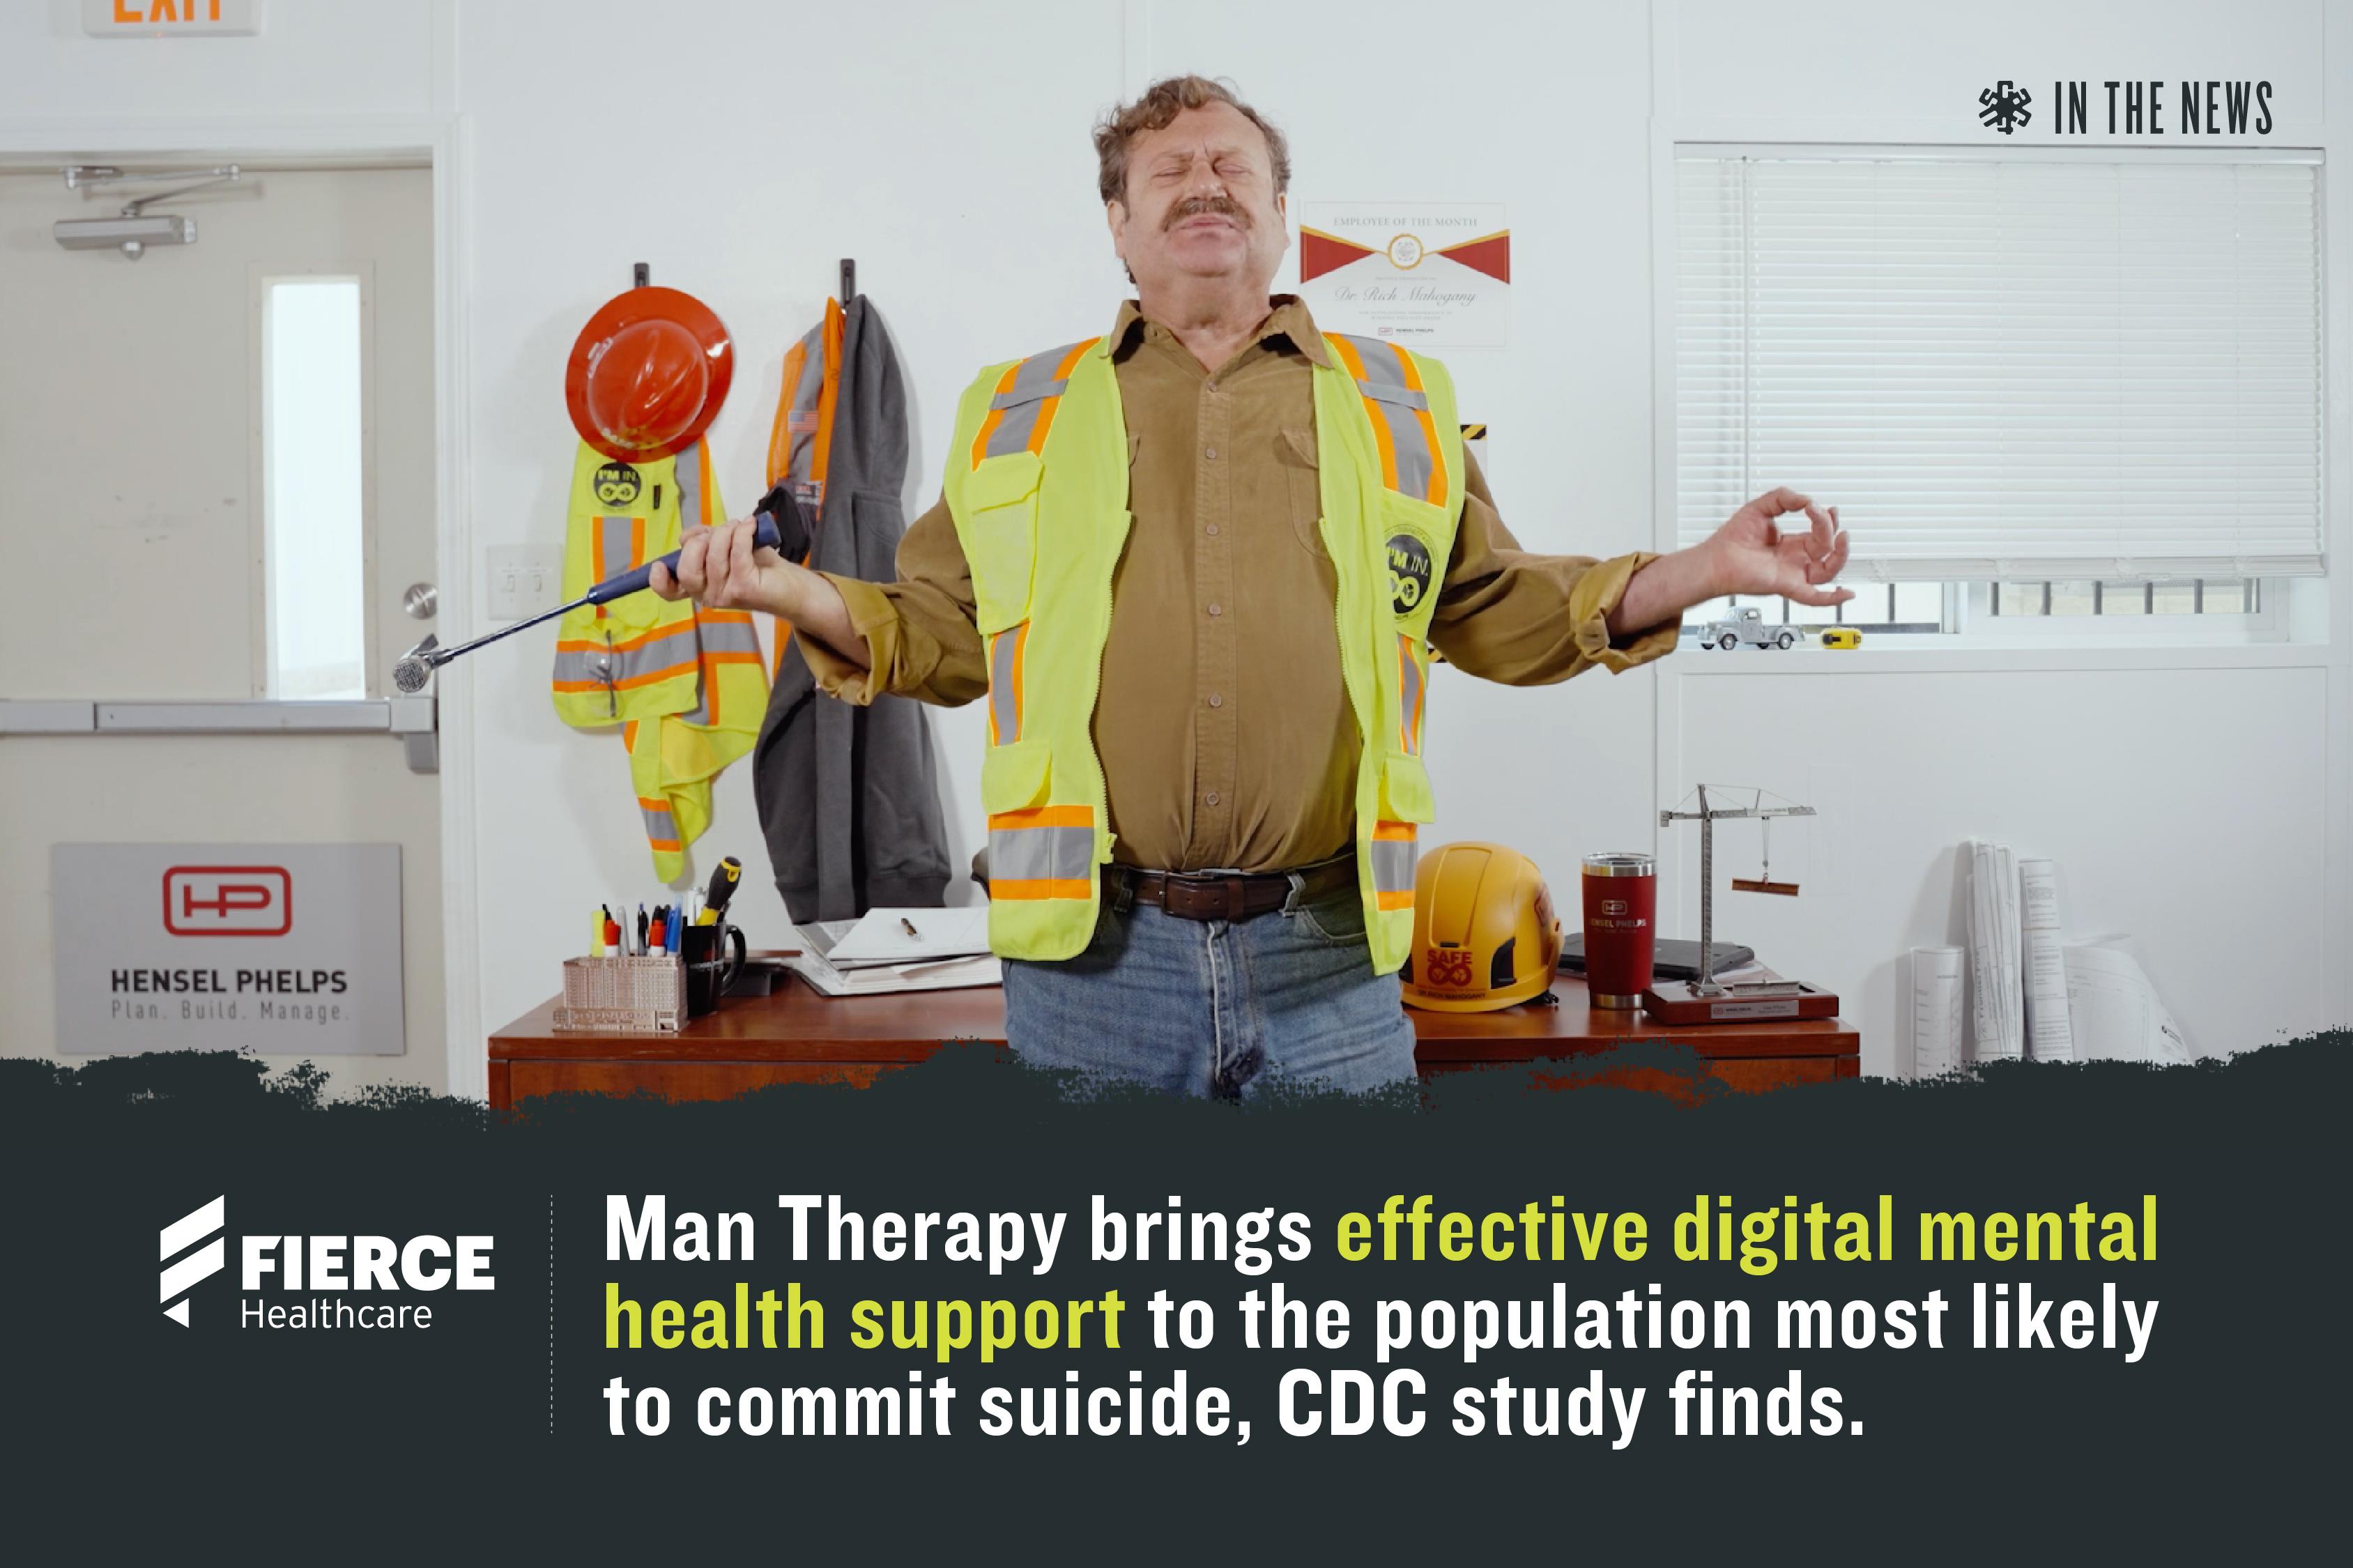 Man Therapy brings effective digital mental health support to the population most likely to commit suicide, CDC study finds